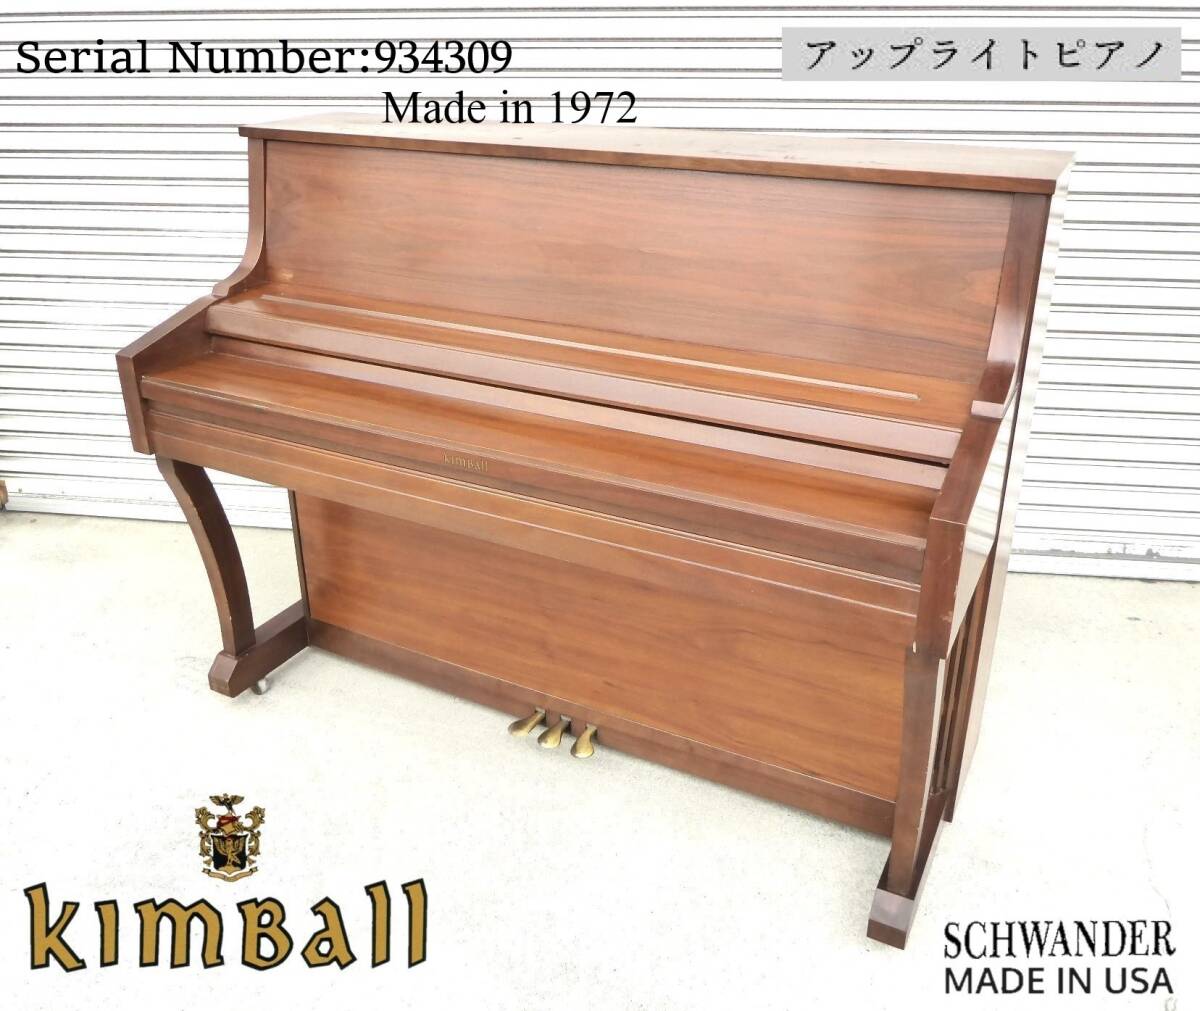 * gold ball /KimBall Made in USA 1972 year made upright piano / antique piano *